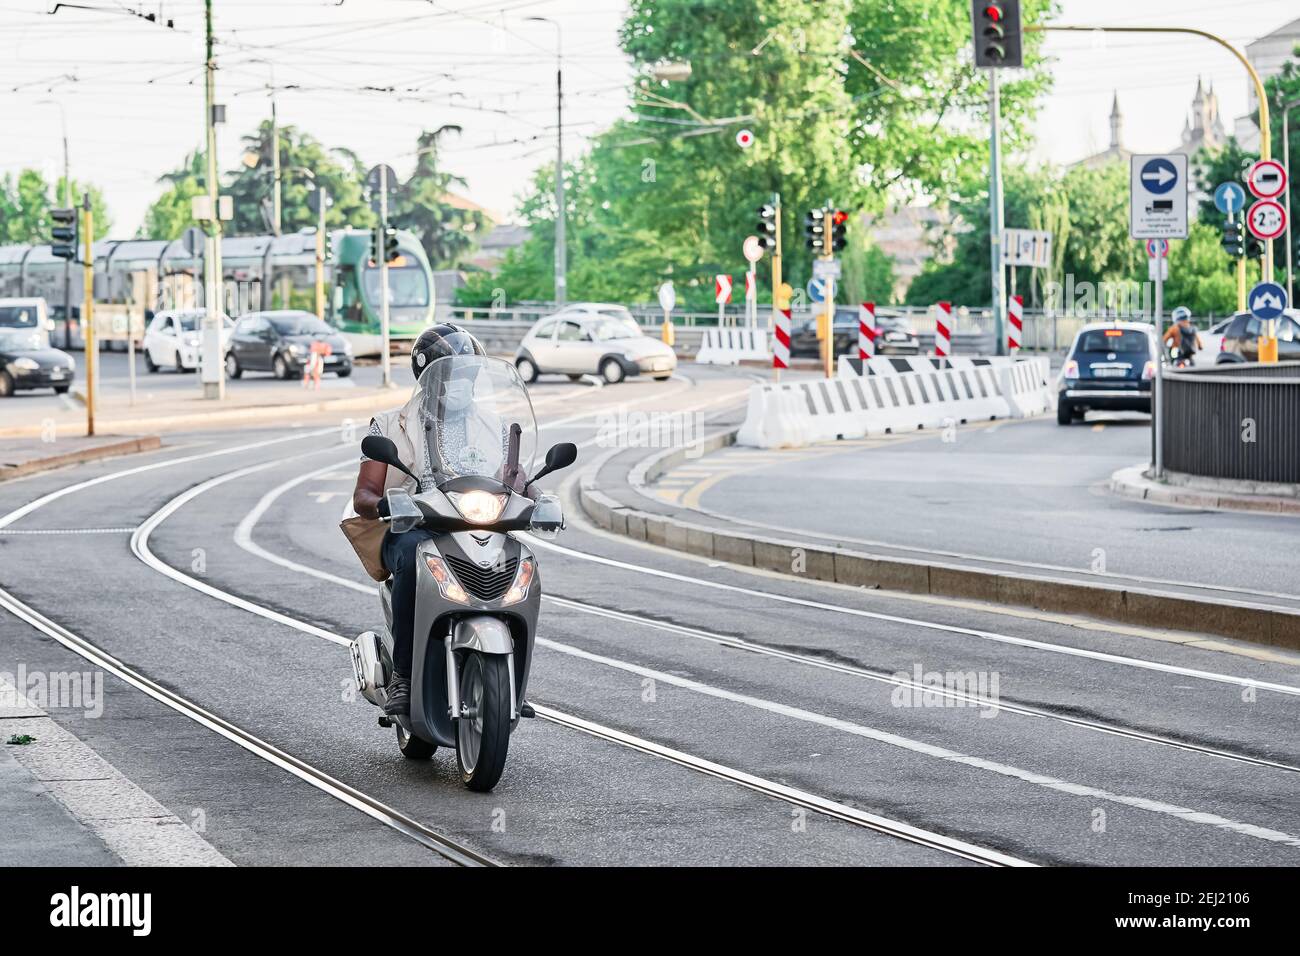 Man riding motorbike in busy city street traffic on tram track.  Motorcyclist drives motorcycle. Milan, Italy - May 26, 2020 Stock Photo -  Alamy